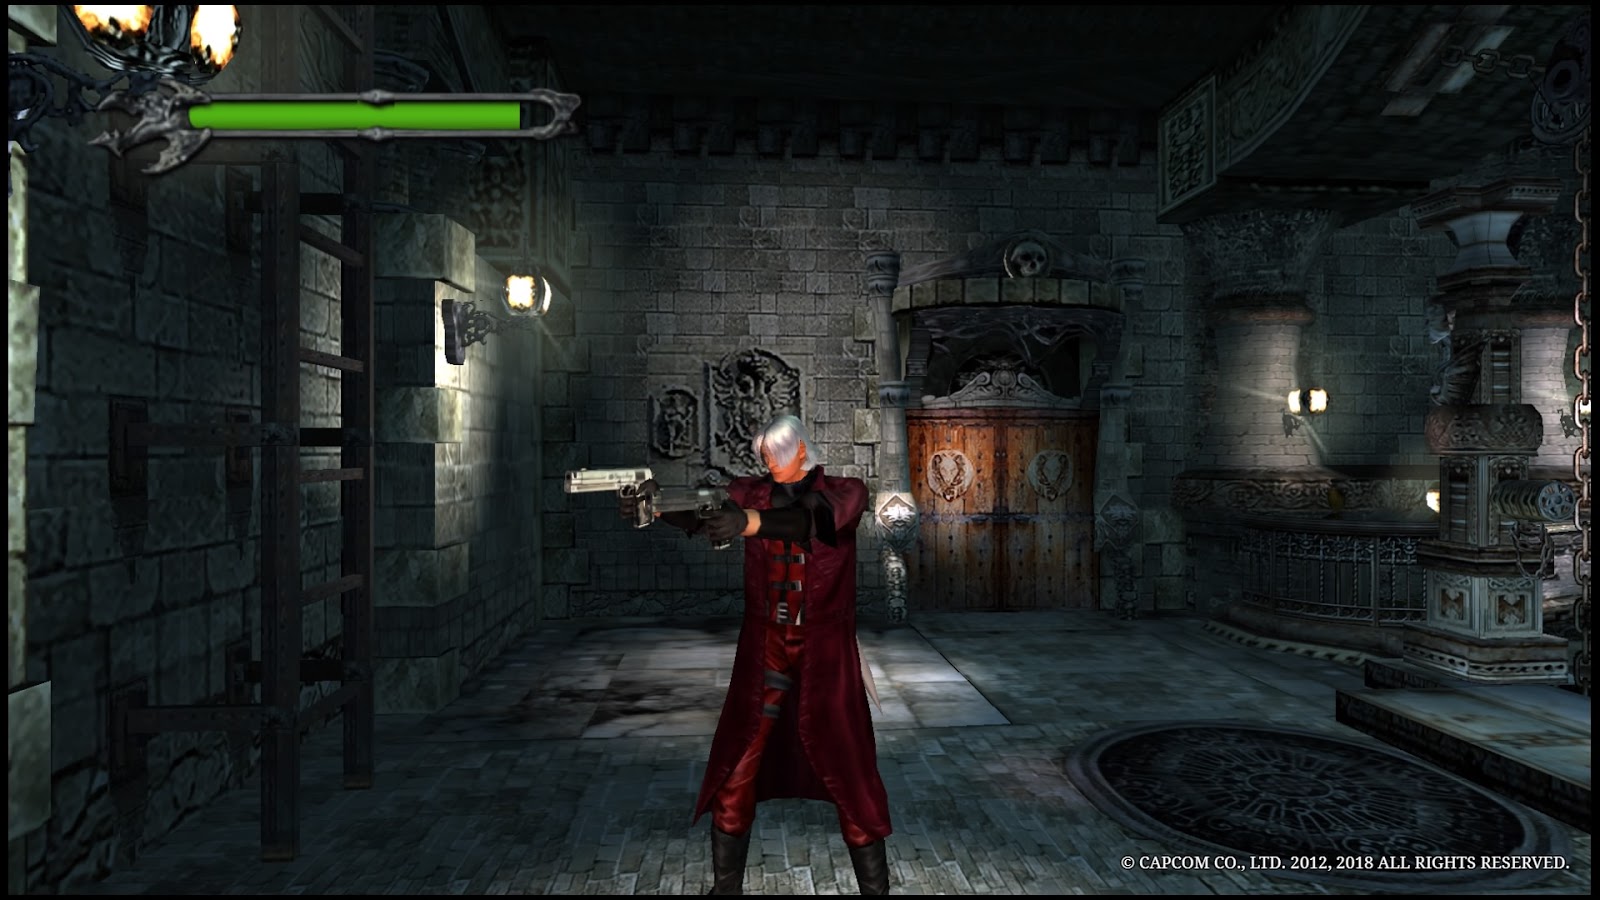 Devil may cry collection русификатор. Ролевая игра Devil Gate. Adored by the Devil игра картинки.